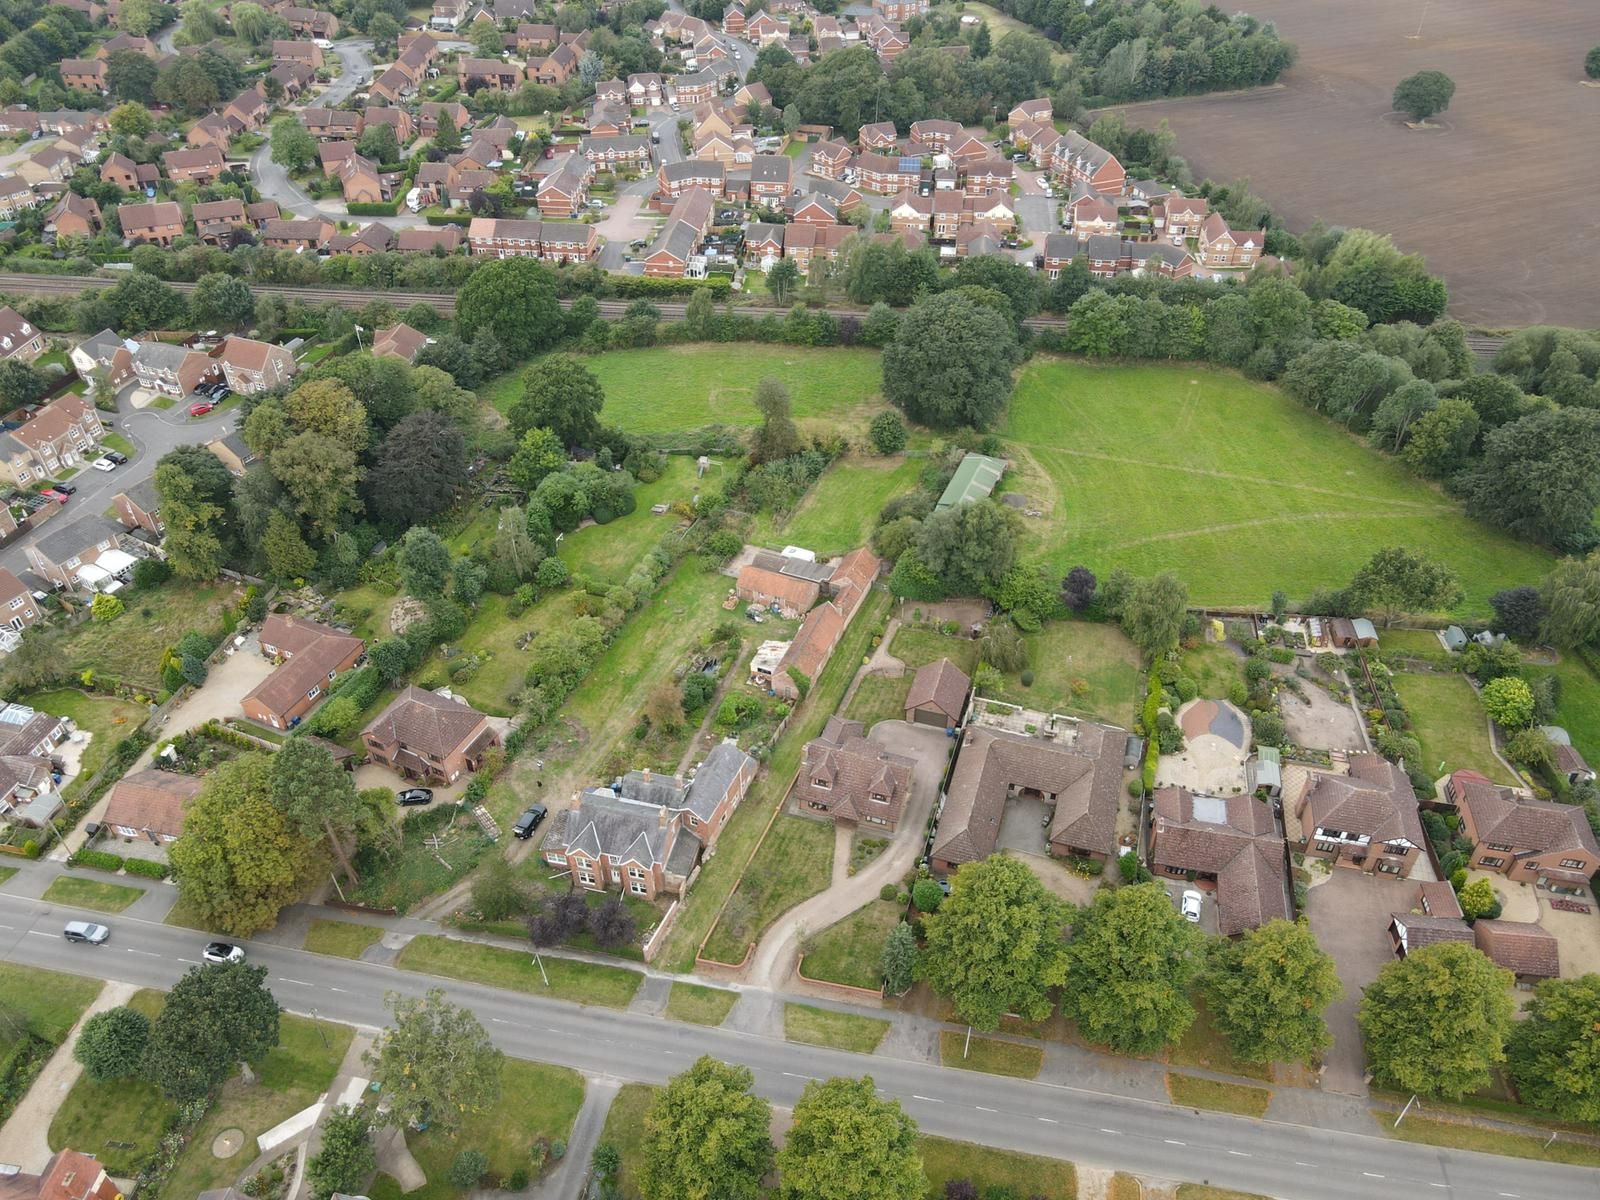 Plans approved for a substantial new self-build family home in Sudbrooke near Lincoln